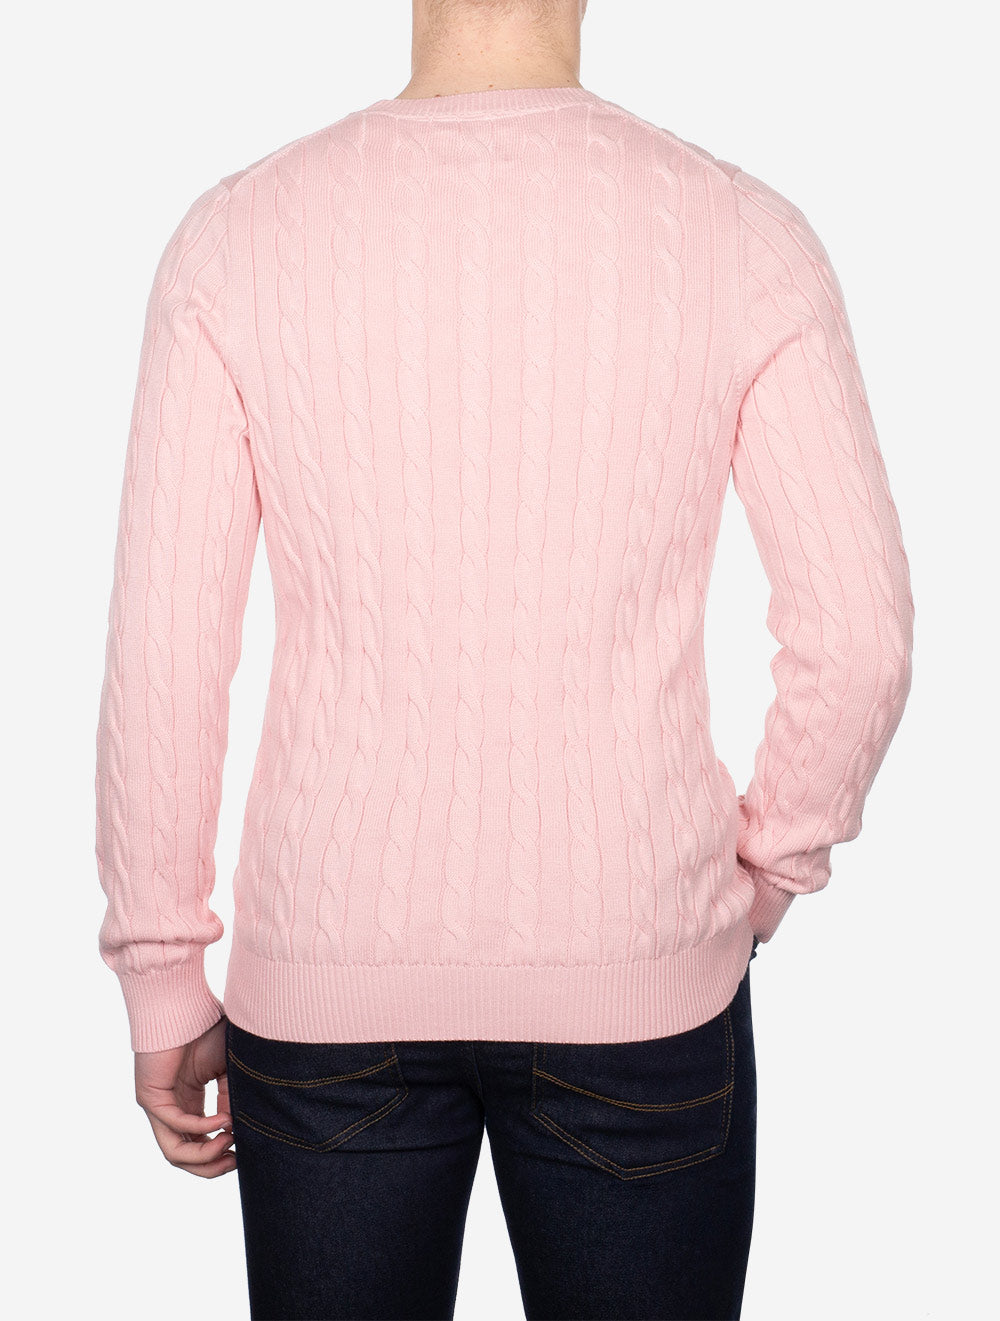 Cotton Cable Crew Neck Blushing Pink